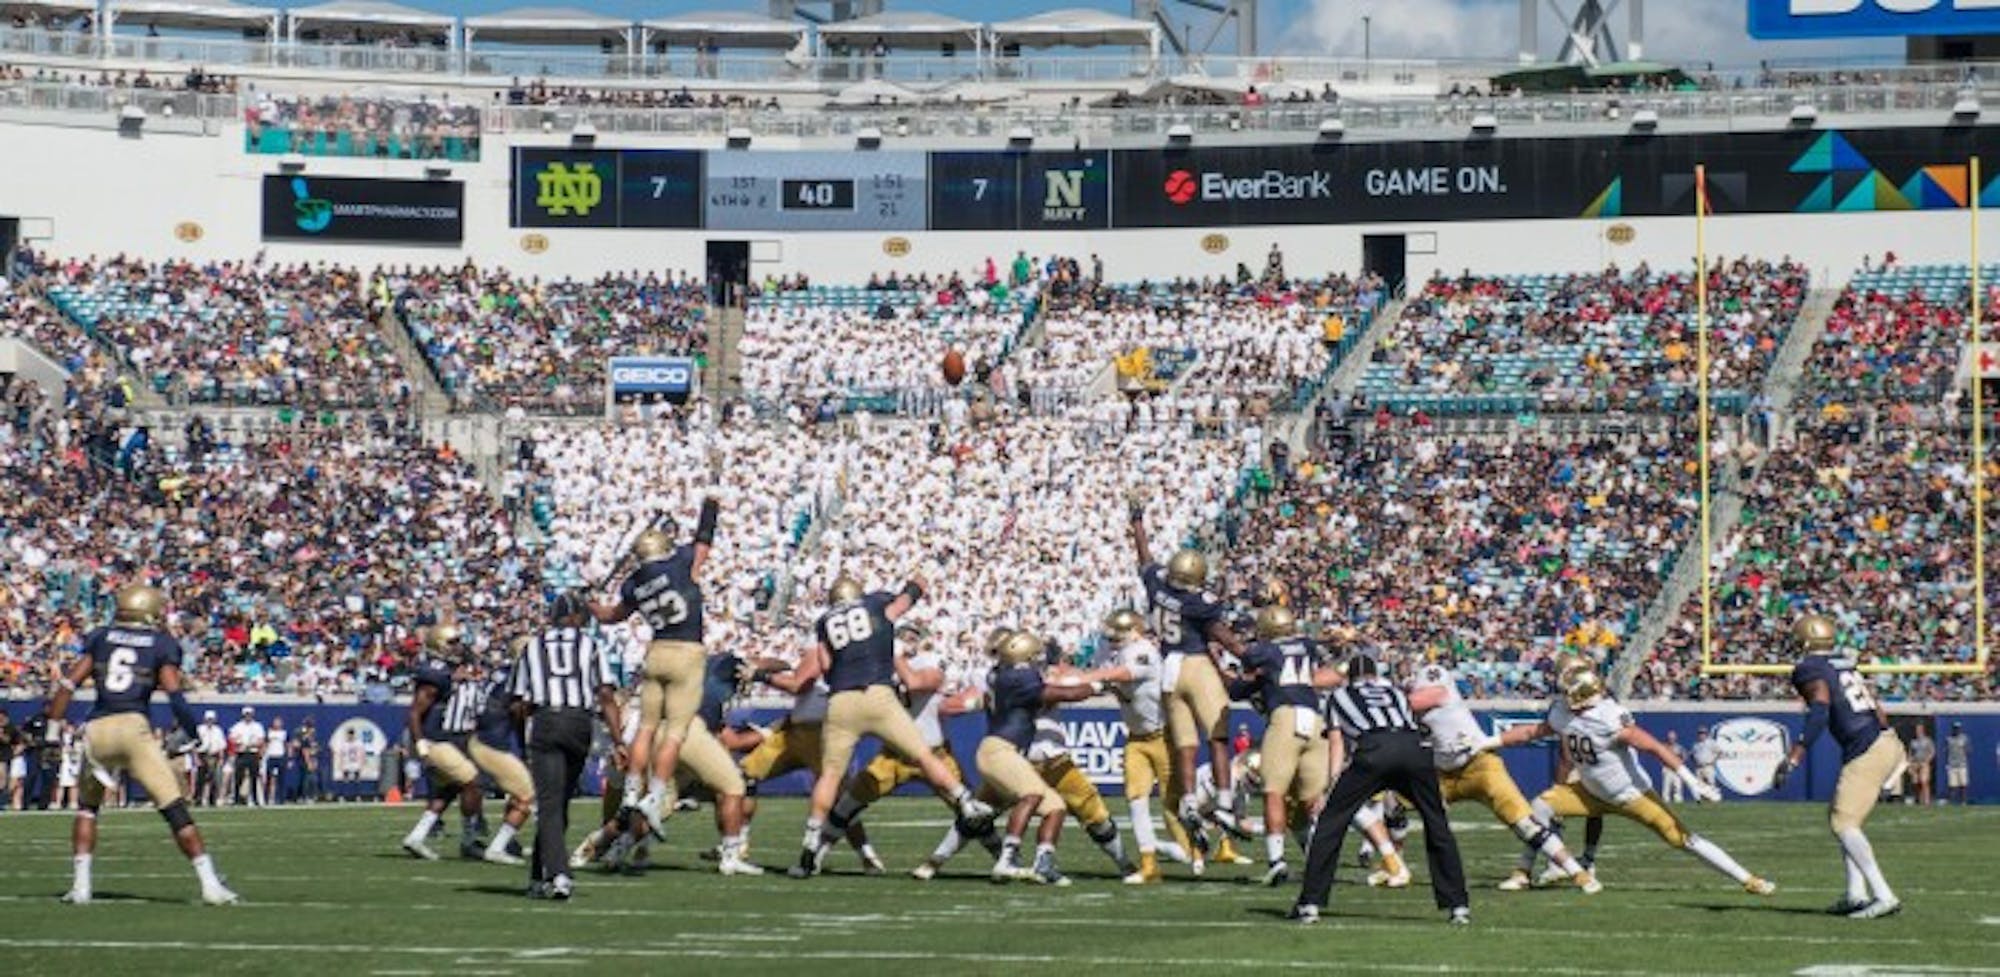 Justin Yoon makes a 39 yard field goal to give ND a 10-7 lead with 1:47 left in the 1st Quarter.